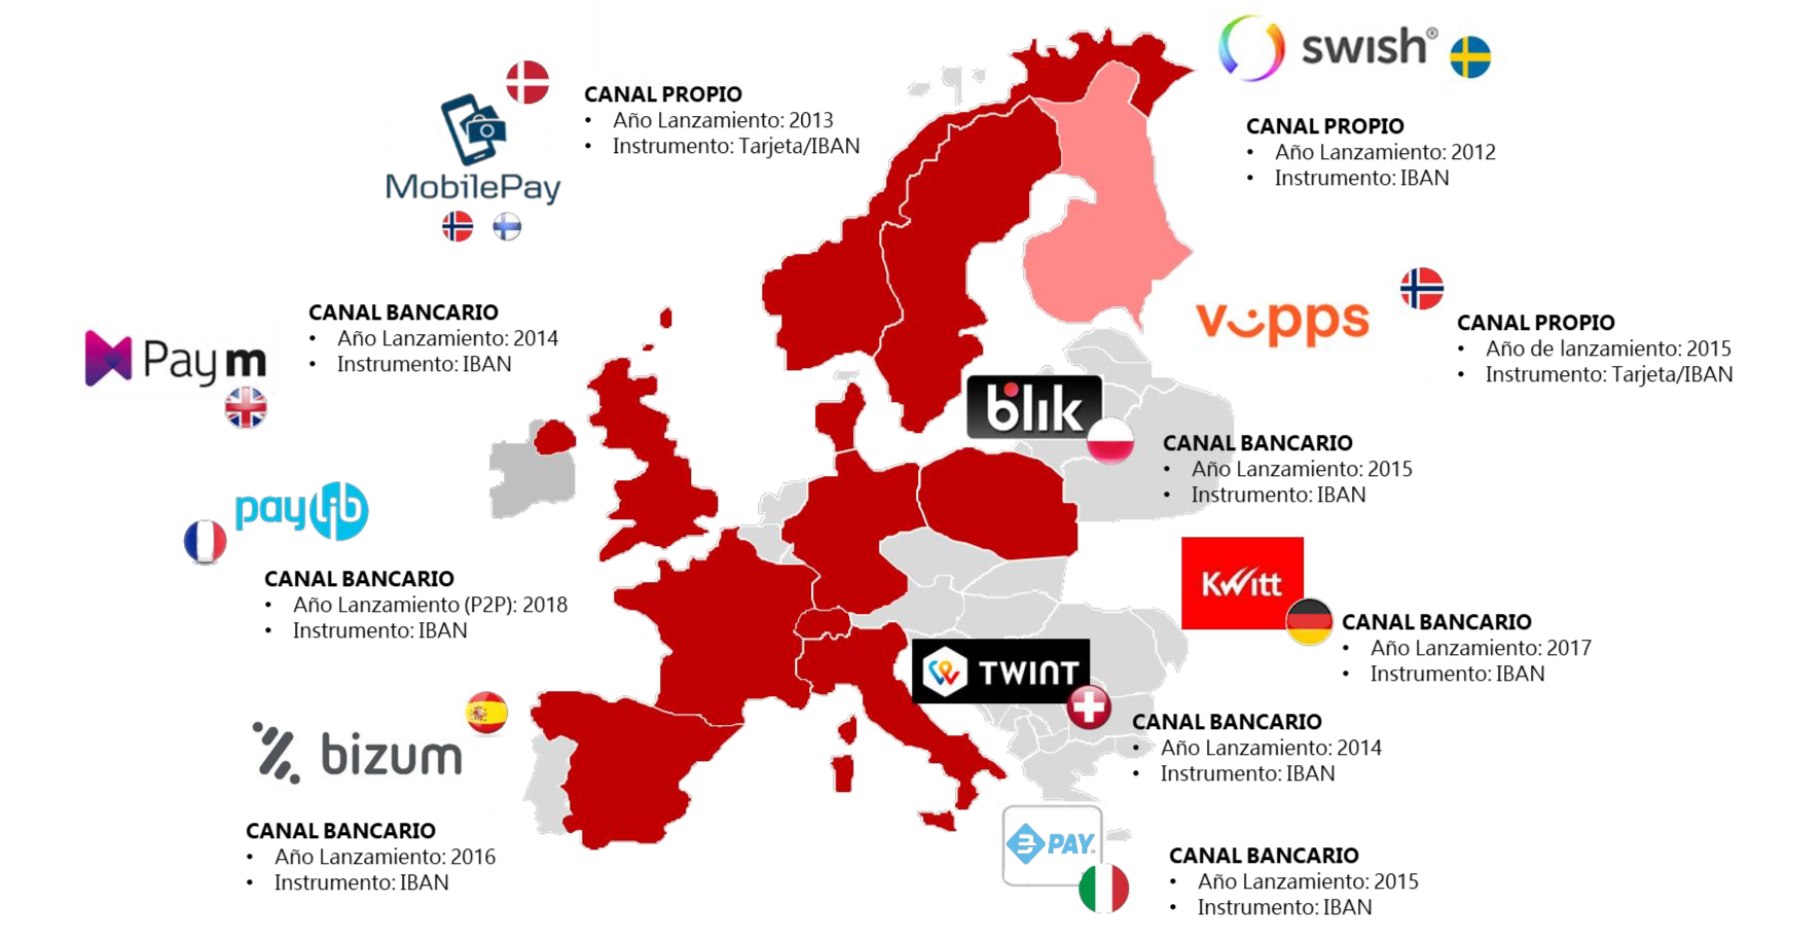 Bizum can be the European payment solution, will banks go for it?